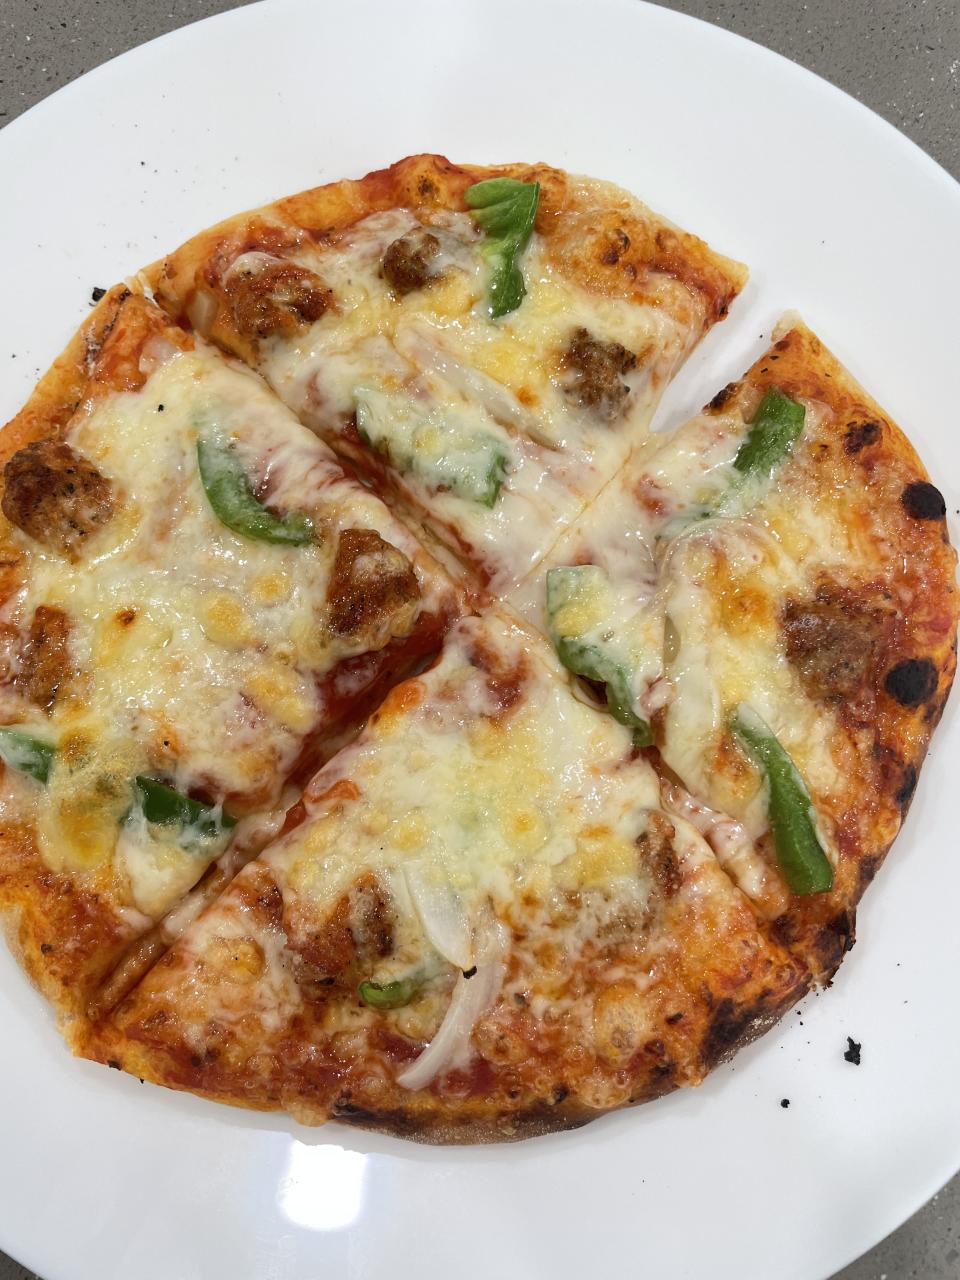 Here is the homemade pizza I made in 60 seconds with the Ooni Volt 12 electric pizza oven.